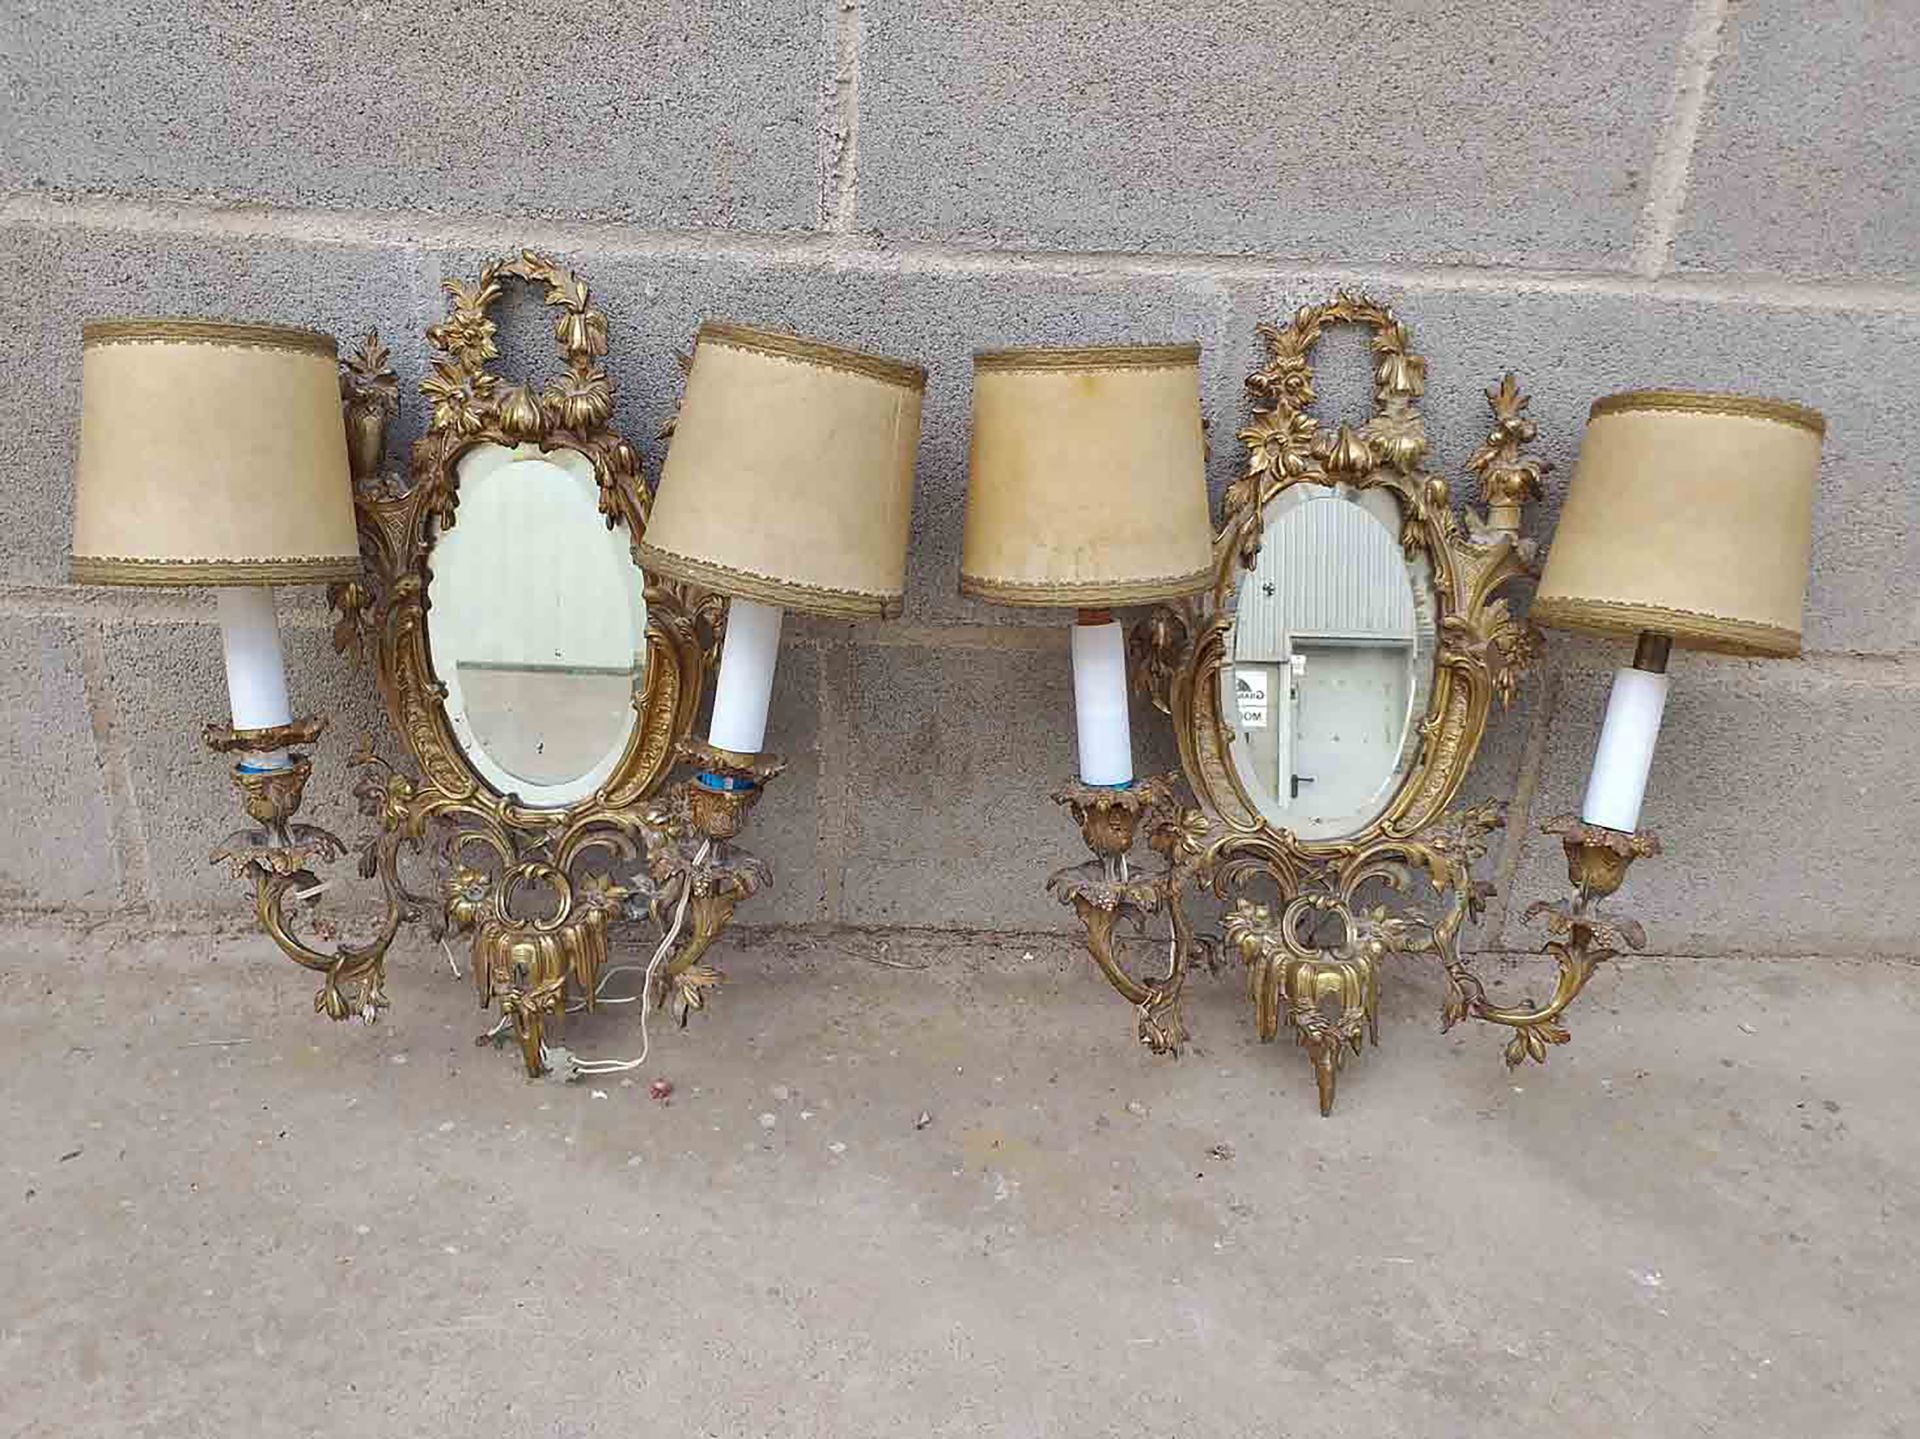 Pair of elegant lamps in the form of French Louis XV style wall sconces in gilt bronze, 19th century